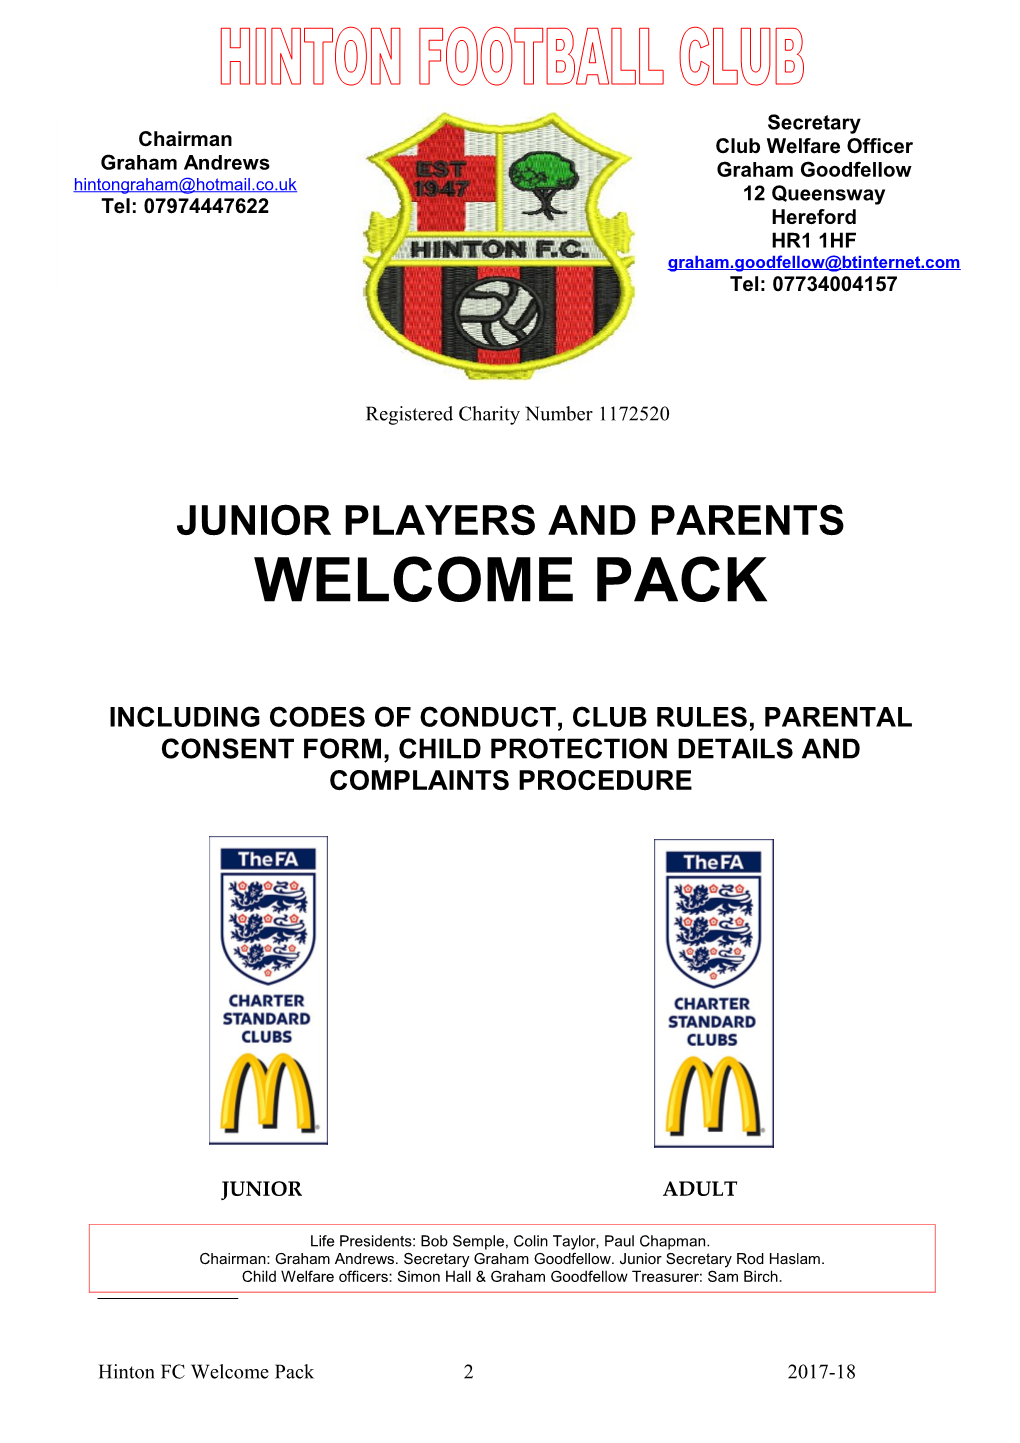 Junior Players and Parents Welcome Pack